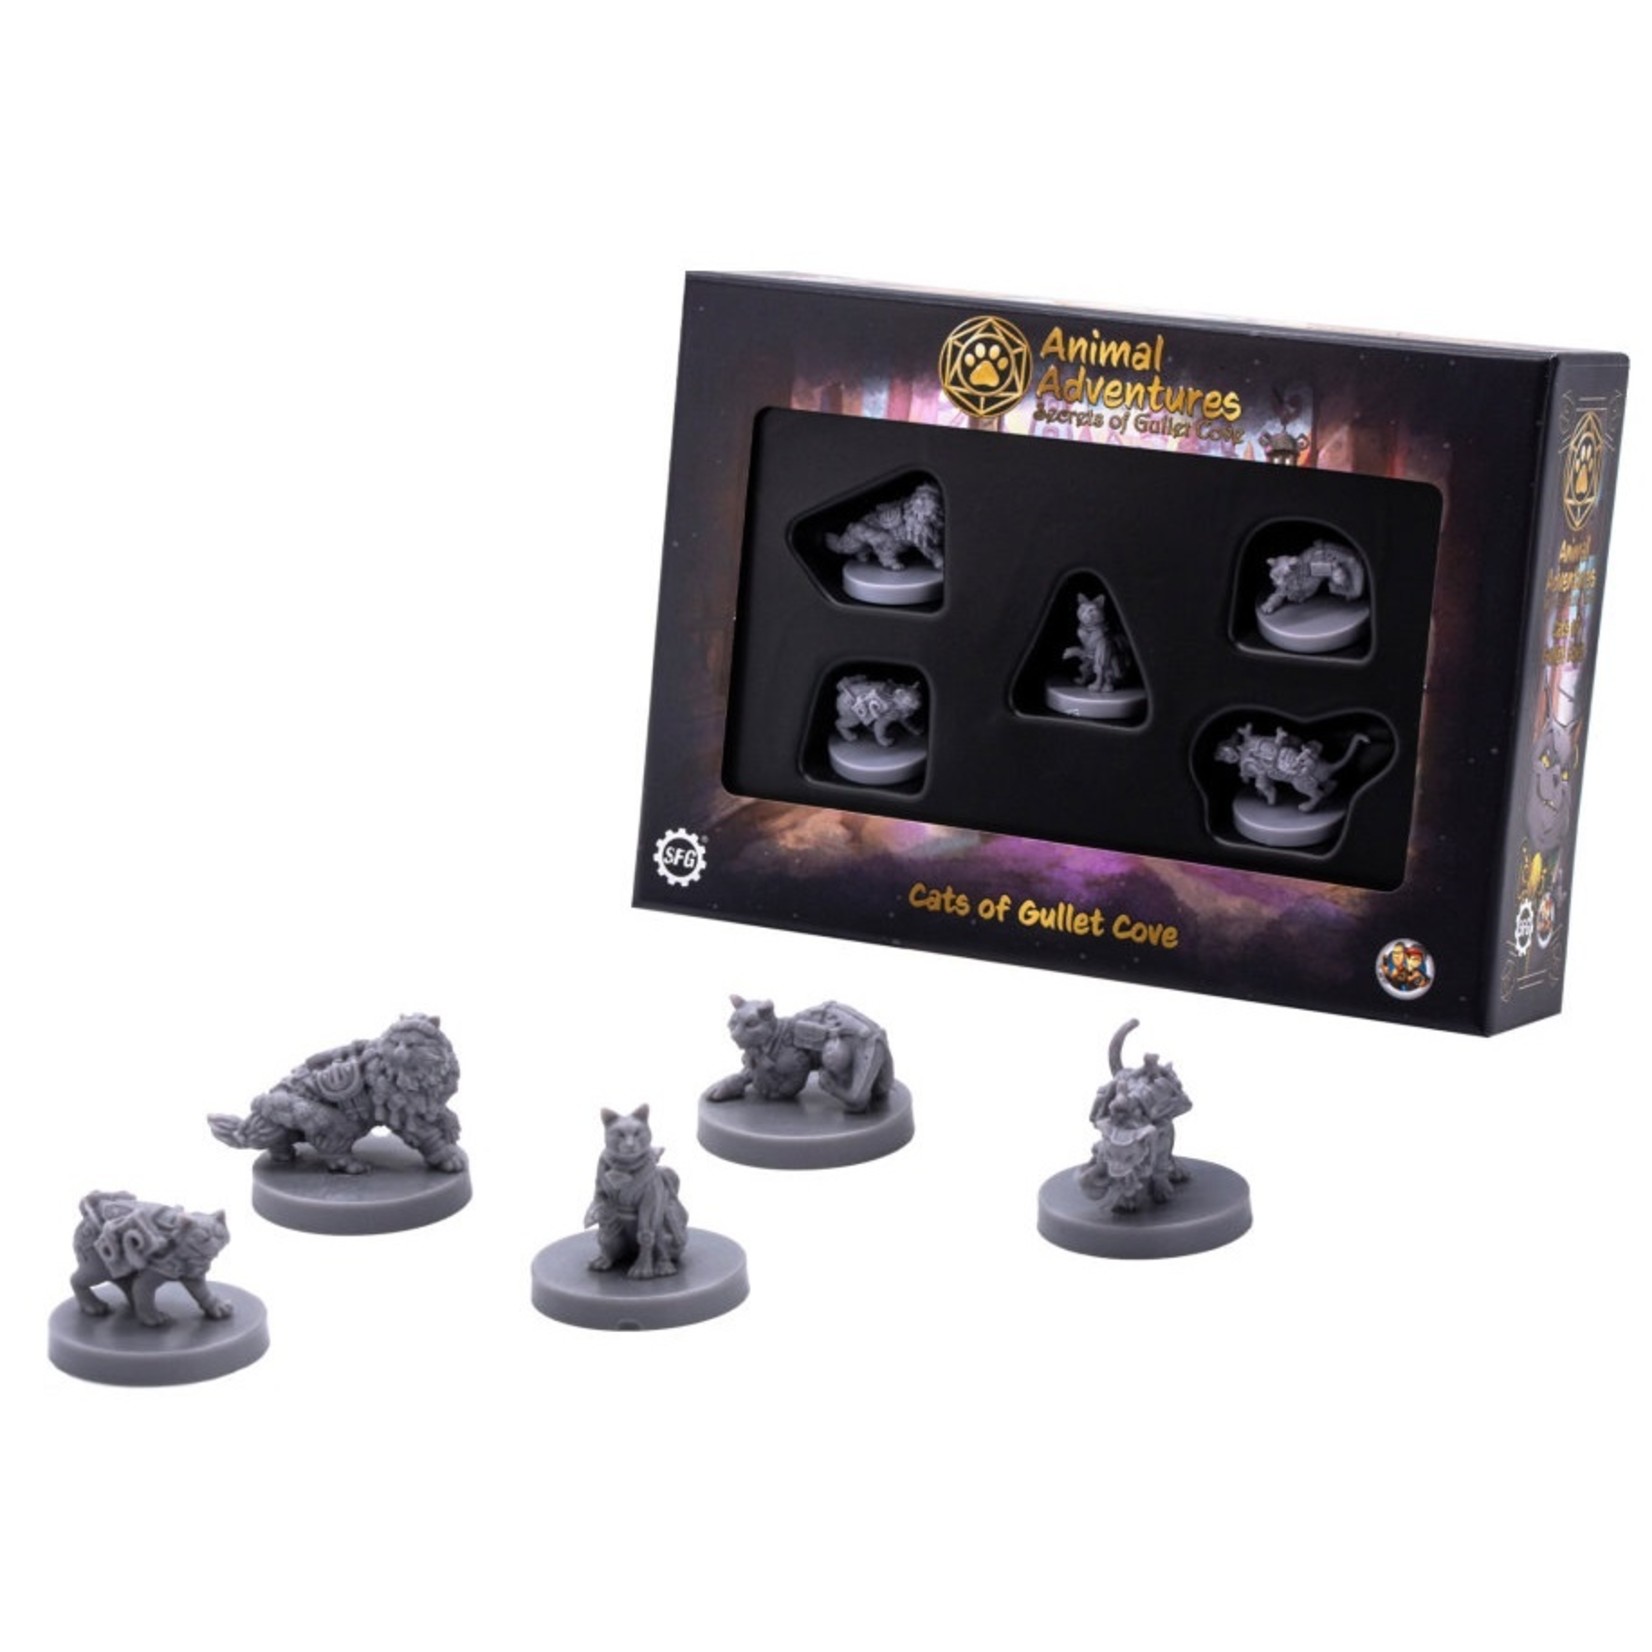 Steamforged Games Animal Adventures: Secrets of Gullet Cove